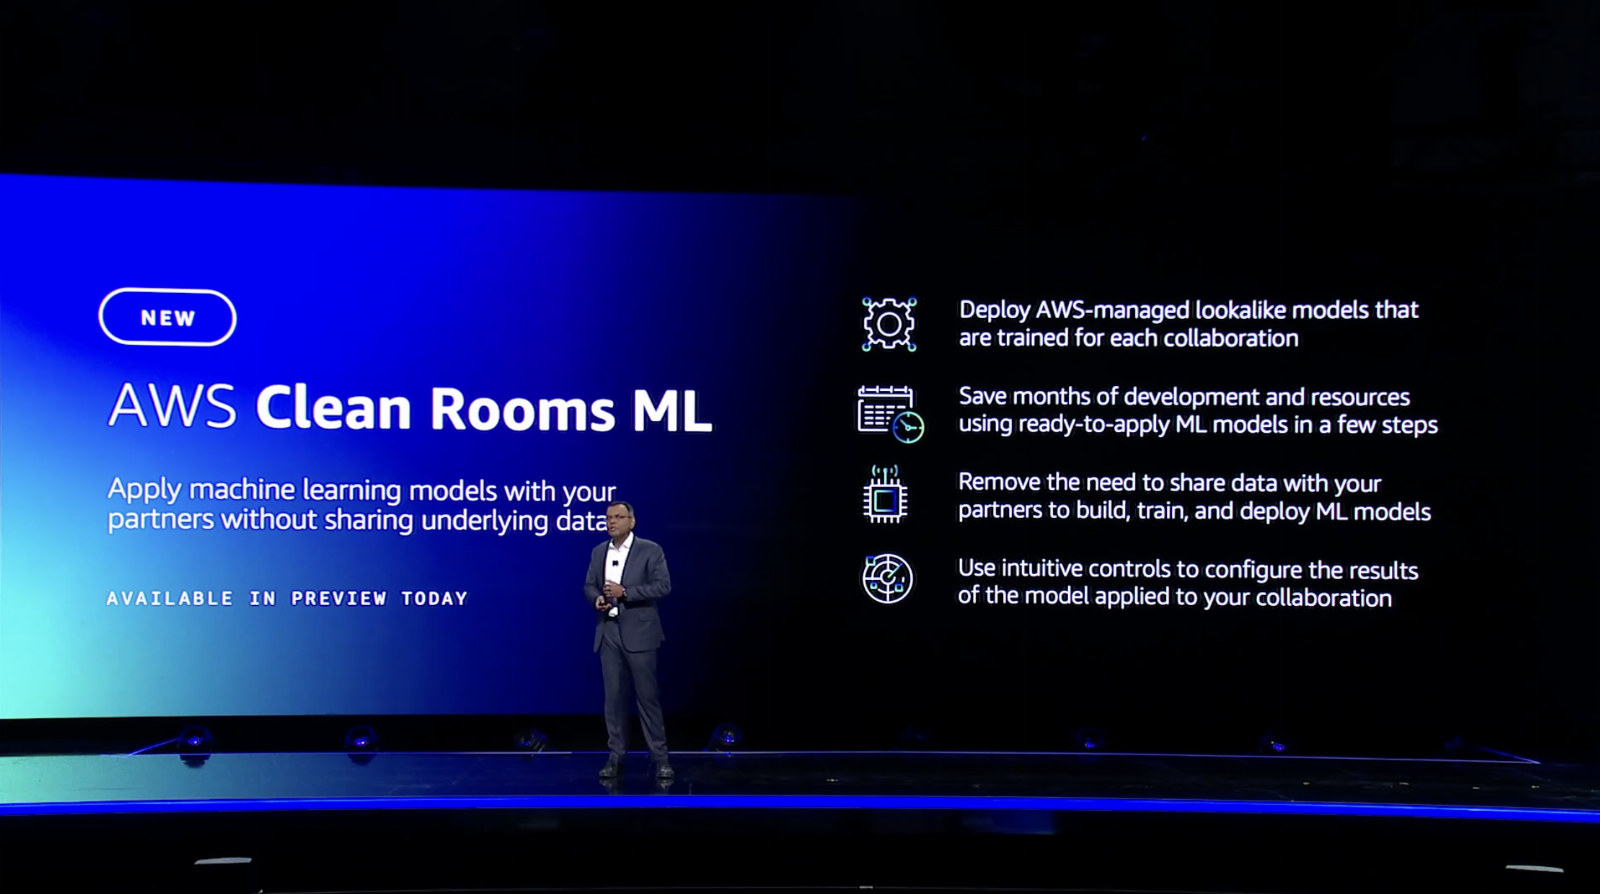 AWS Clean Rooms ML lets companies securely collaborate on AI